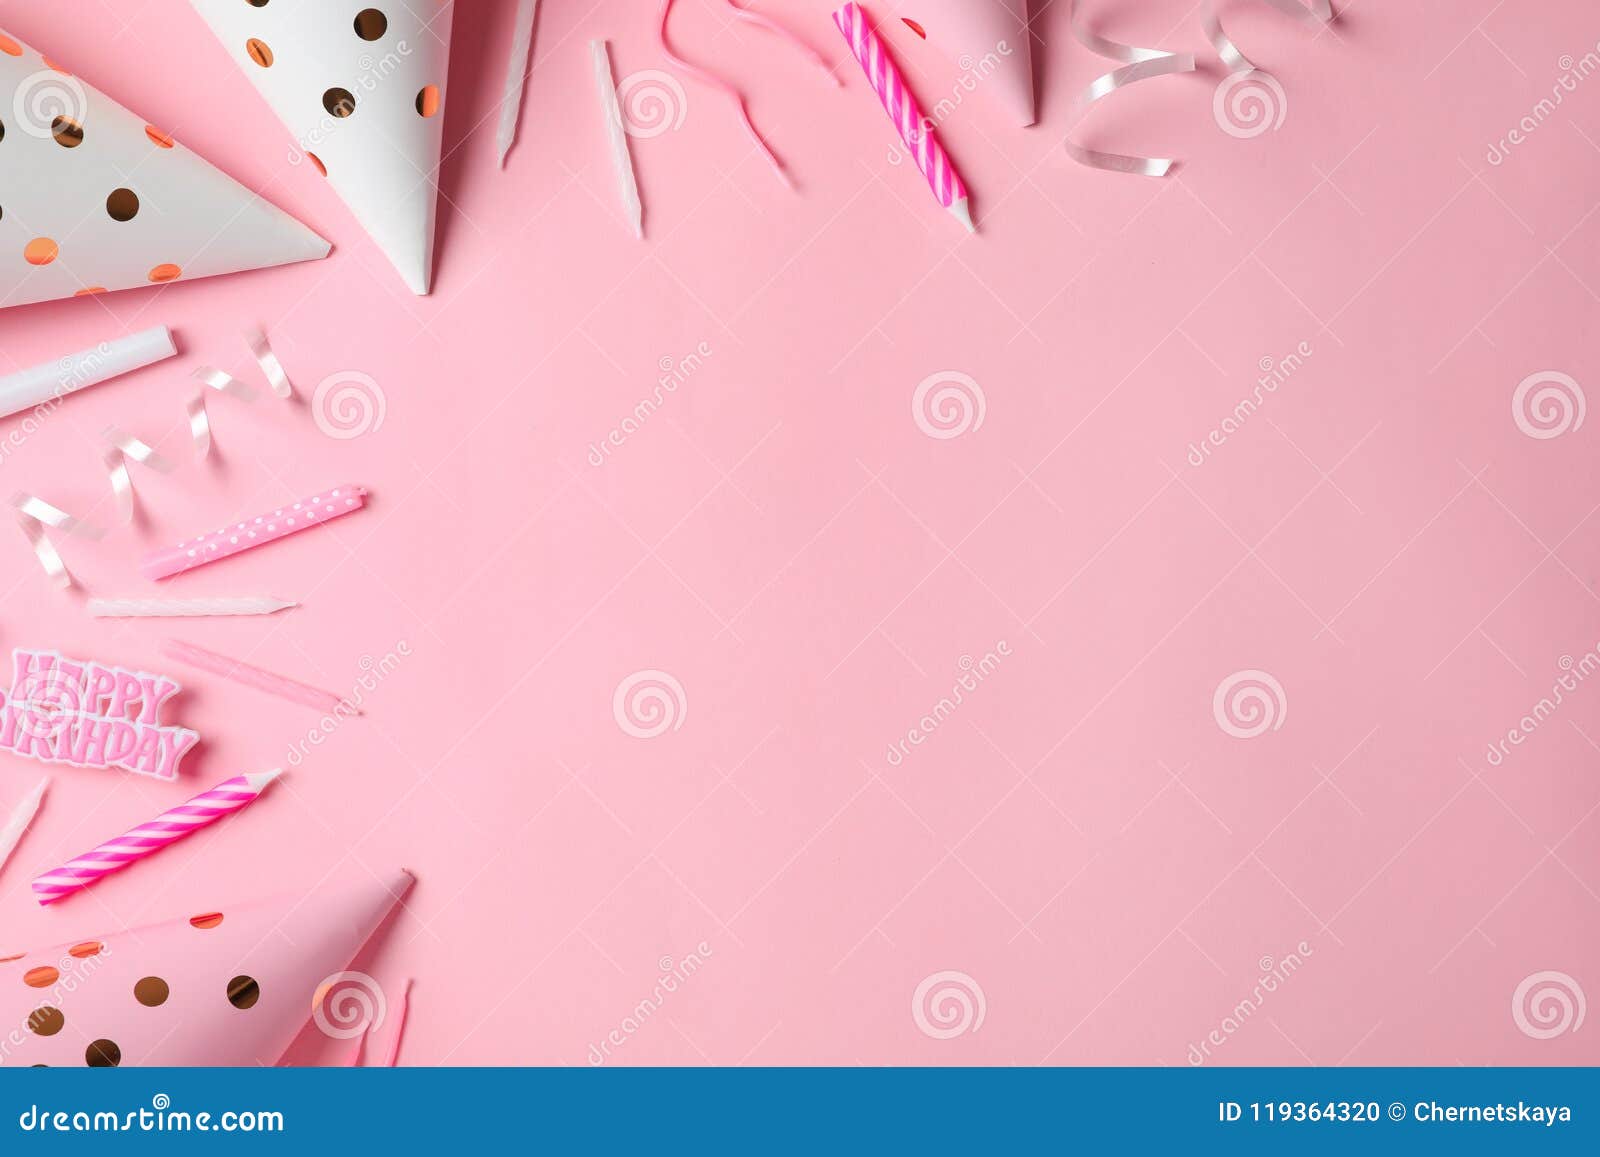 Flat Lay Composition with Birthday Party Items Stock Photo - Image of ...